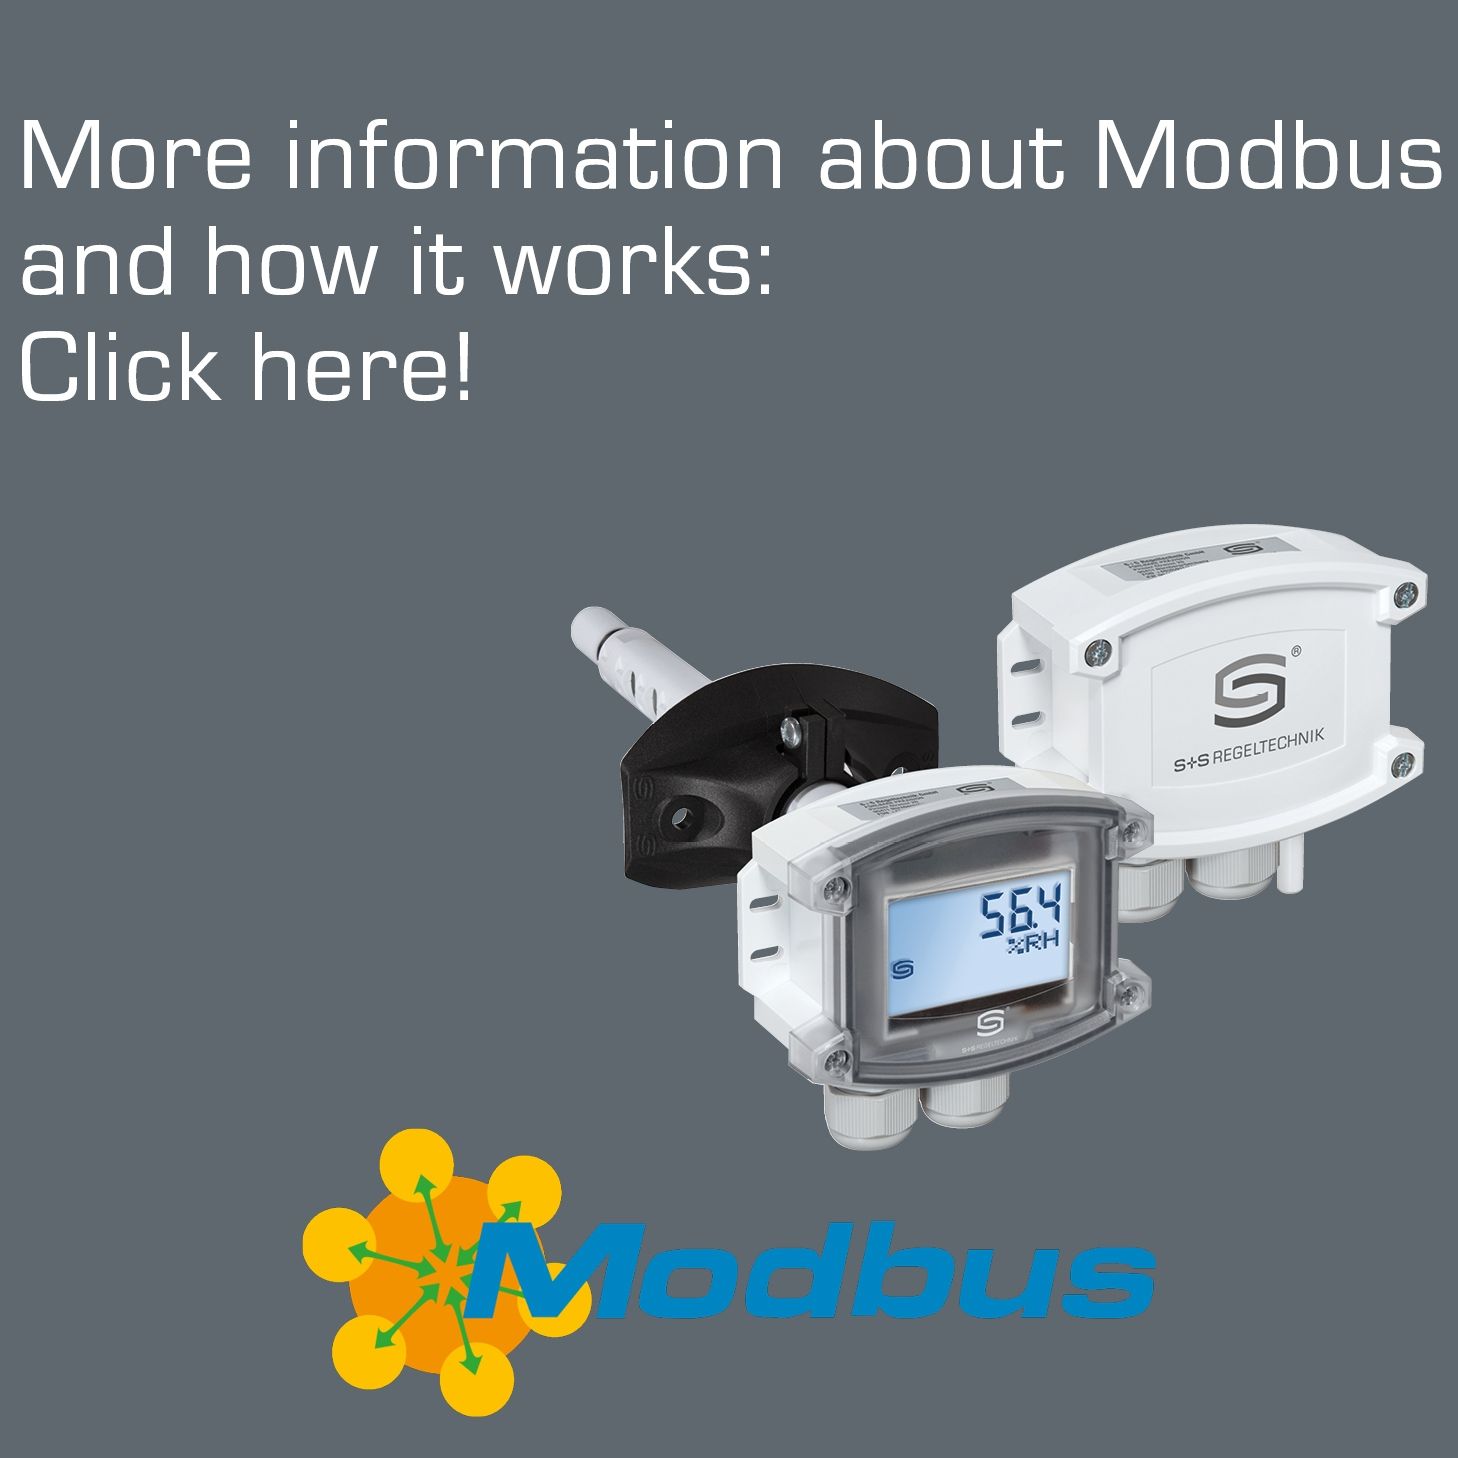 Banner Header More information about Modbus. Modbus logo on the right side and two S+S sensors with Modbus in the center of the picture